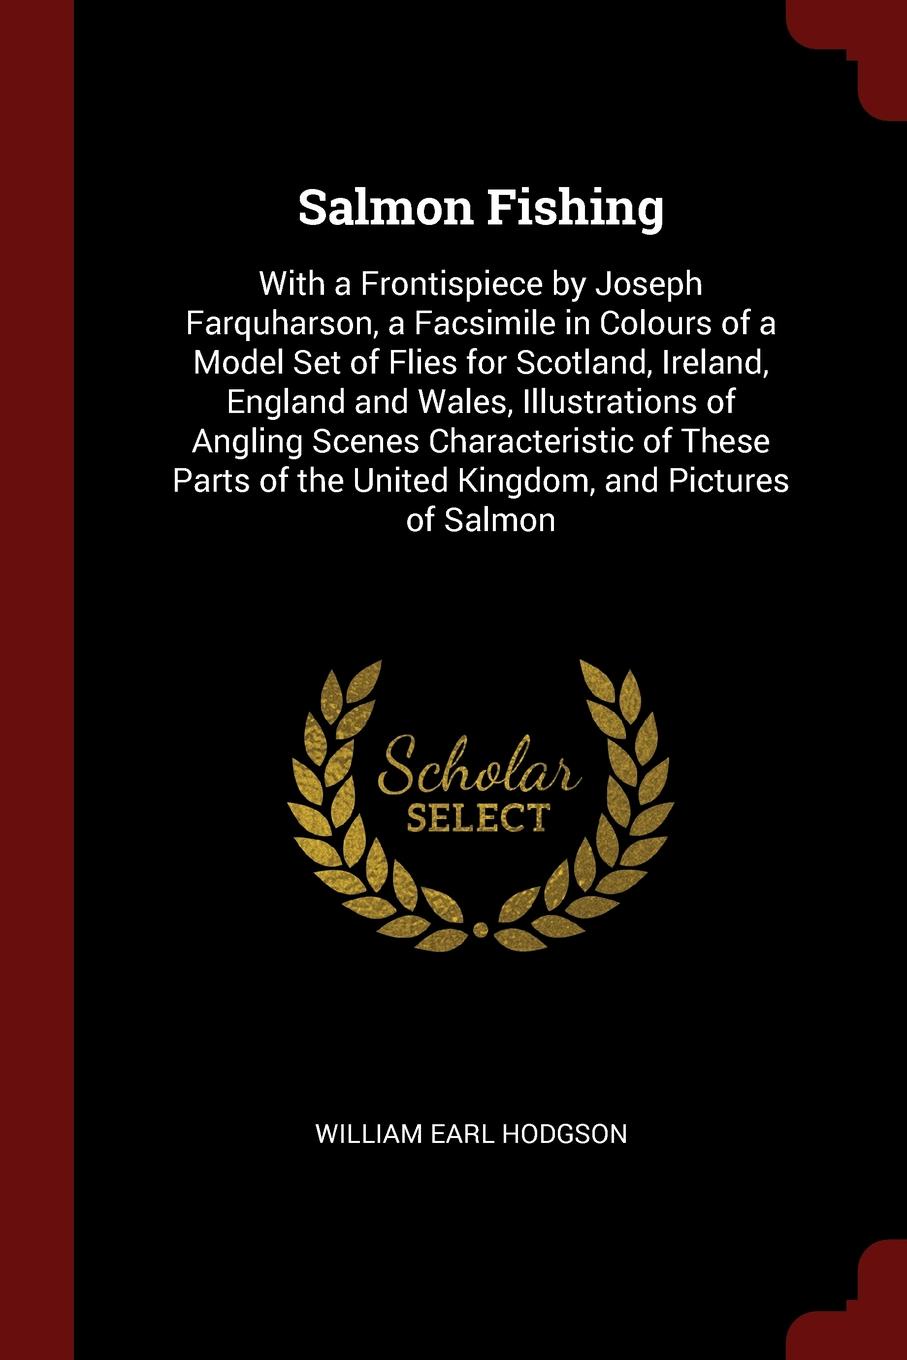 Salmon Fishing. With a Frontispiece by Joseph Farquharson, a Facsimile in Colours of a Model Set of Flies for Scotland, Ireland, England and Wales, Illustrations of Angling Scenes Characteristic of These Parts of the United Kingdom, and Pictures o...